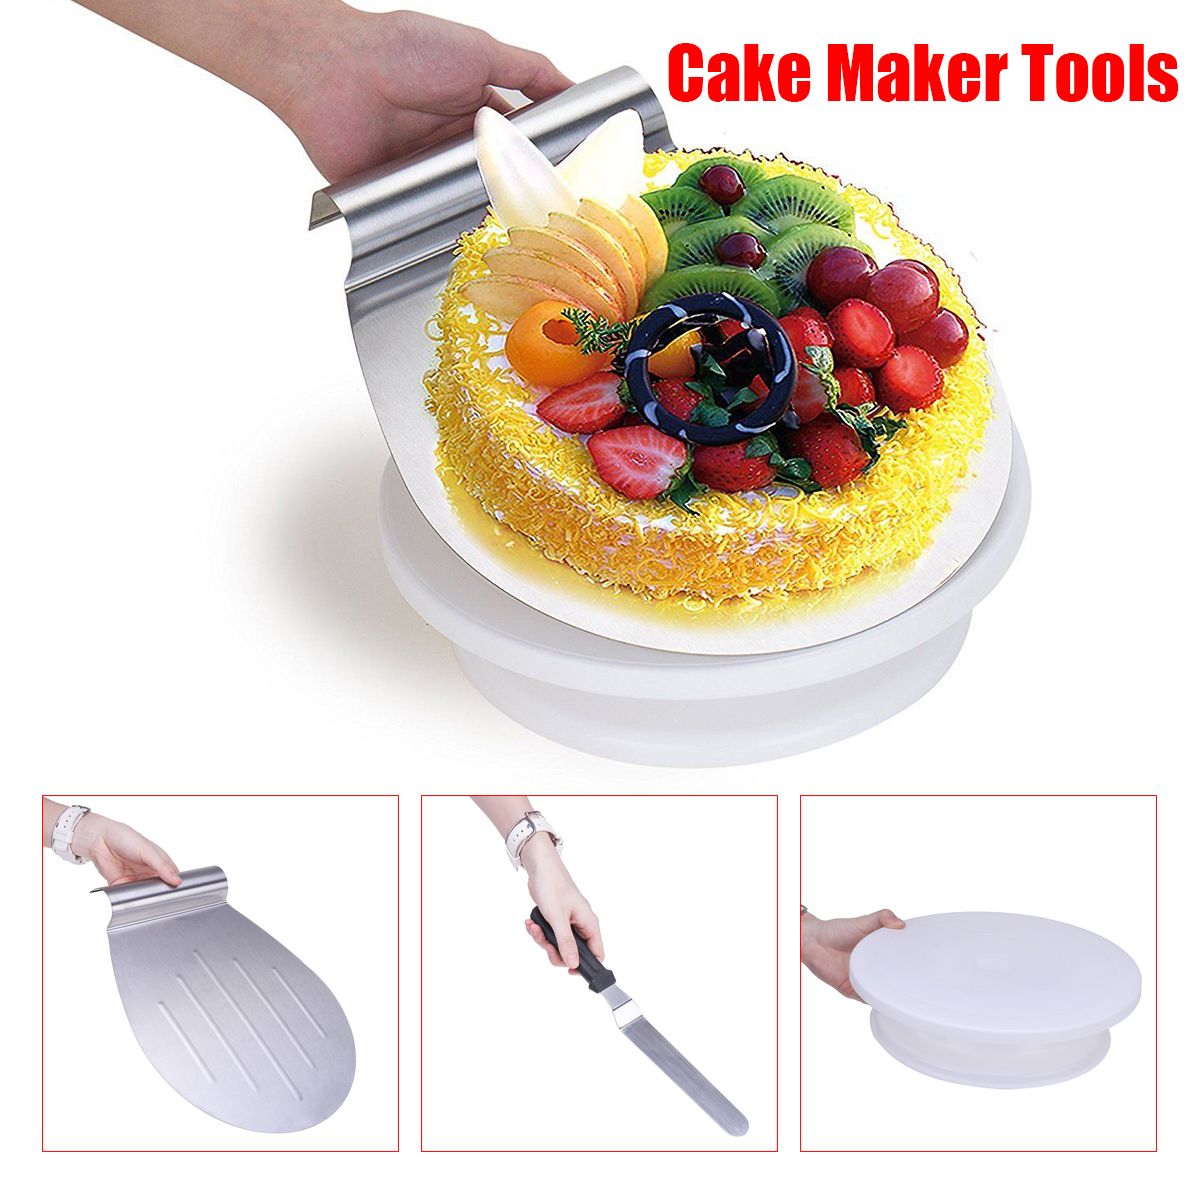 28cm-Rotating-Cake-Icing-Decorating-Revolving-Display-Stand-Turntable-Smoother-1515760